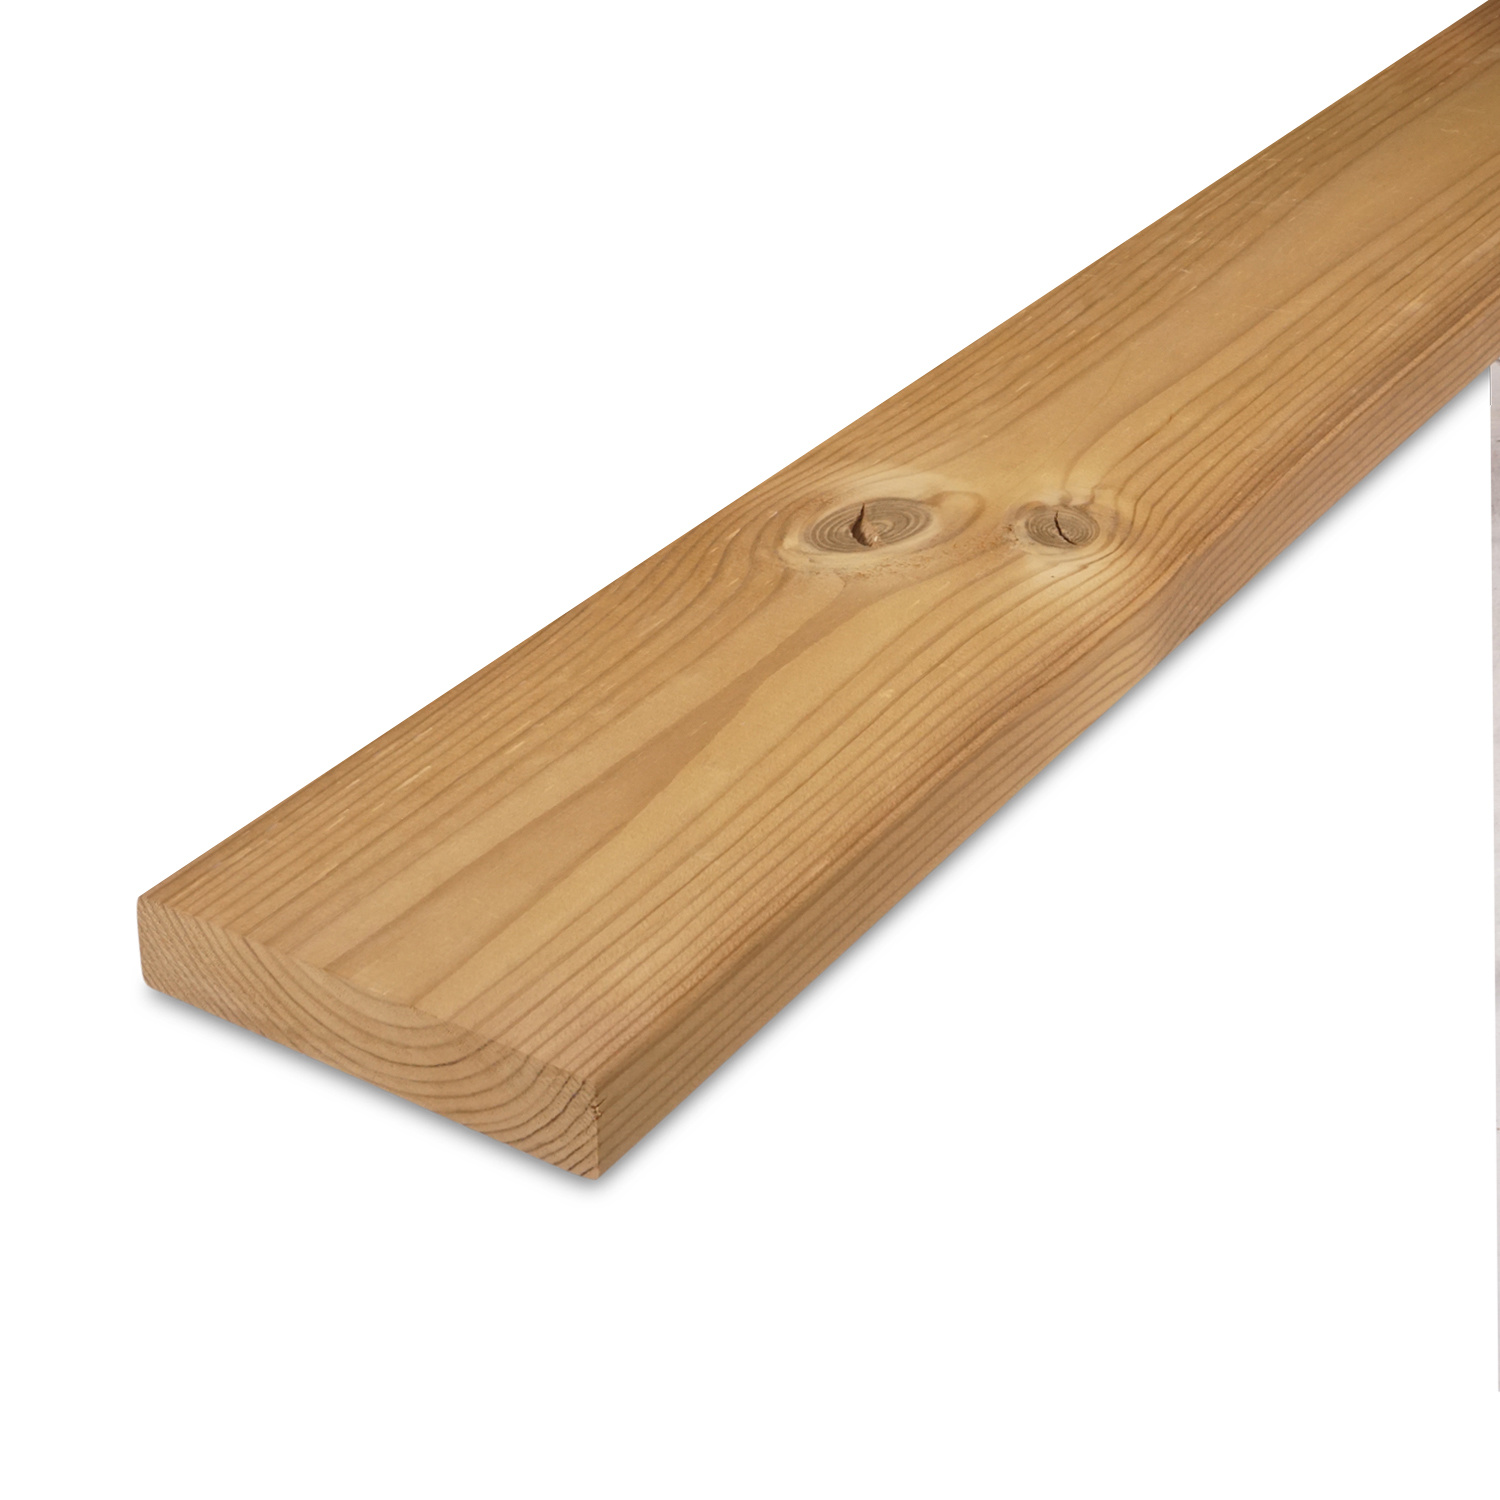 Thermowood grenen plank 28x70mm - thermo grenen kd (8-12%) | HOUTvakman